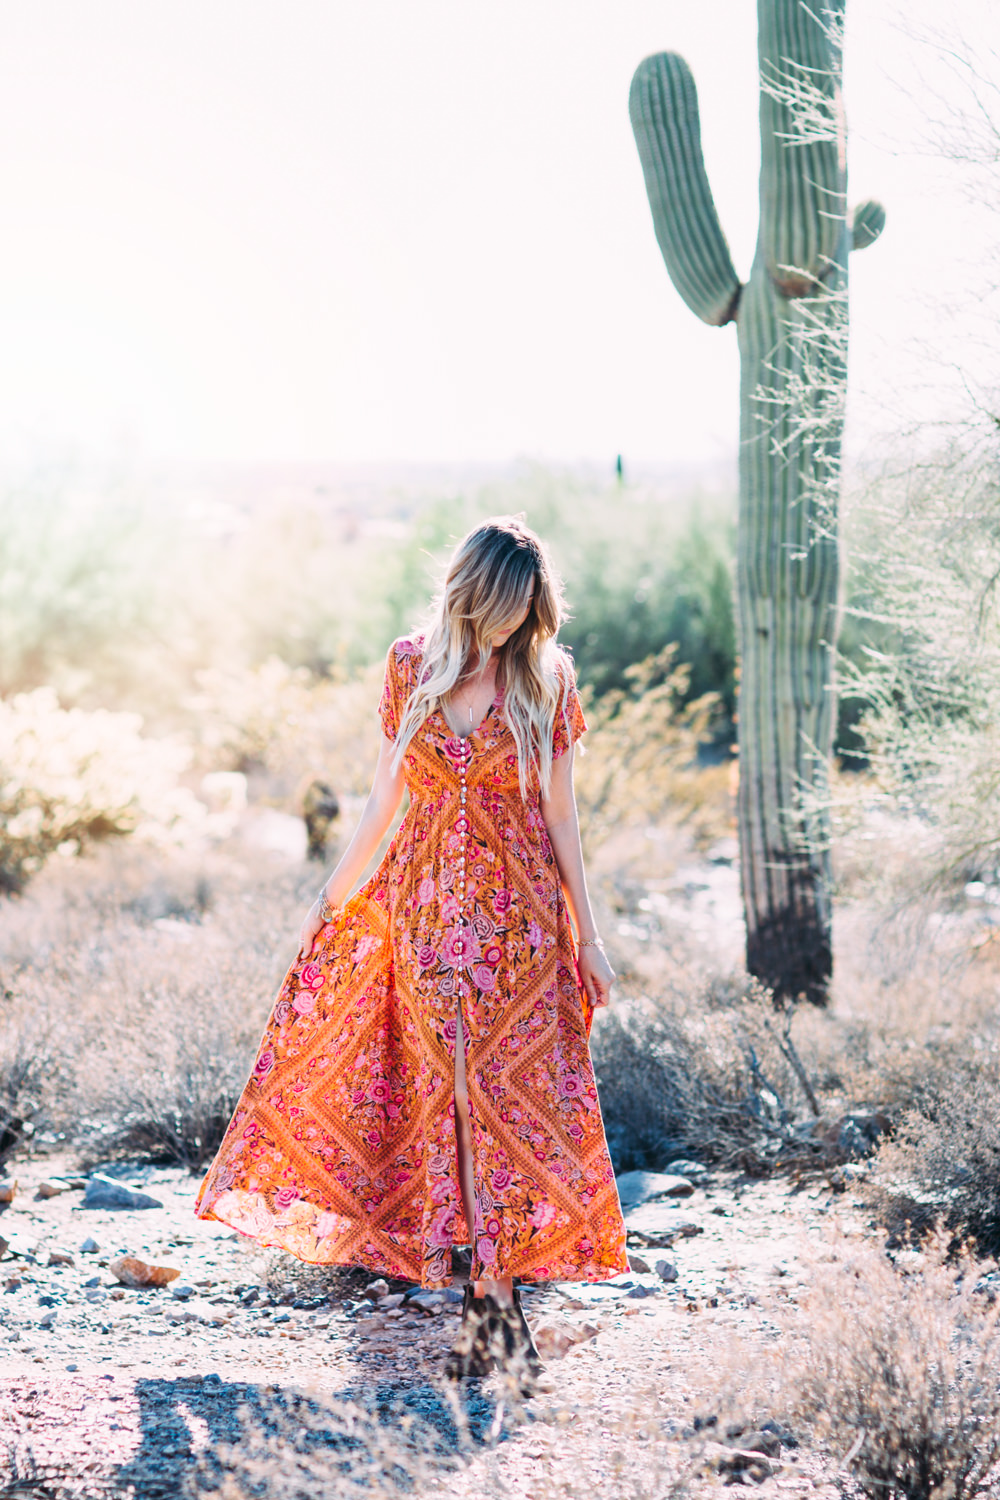 Dash of Darling styles a bohemian vintage floral print button-front maxi dress in the Arizona desert for a simple summer look.